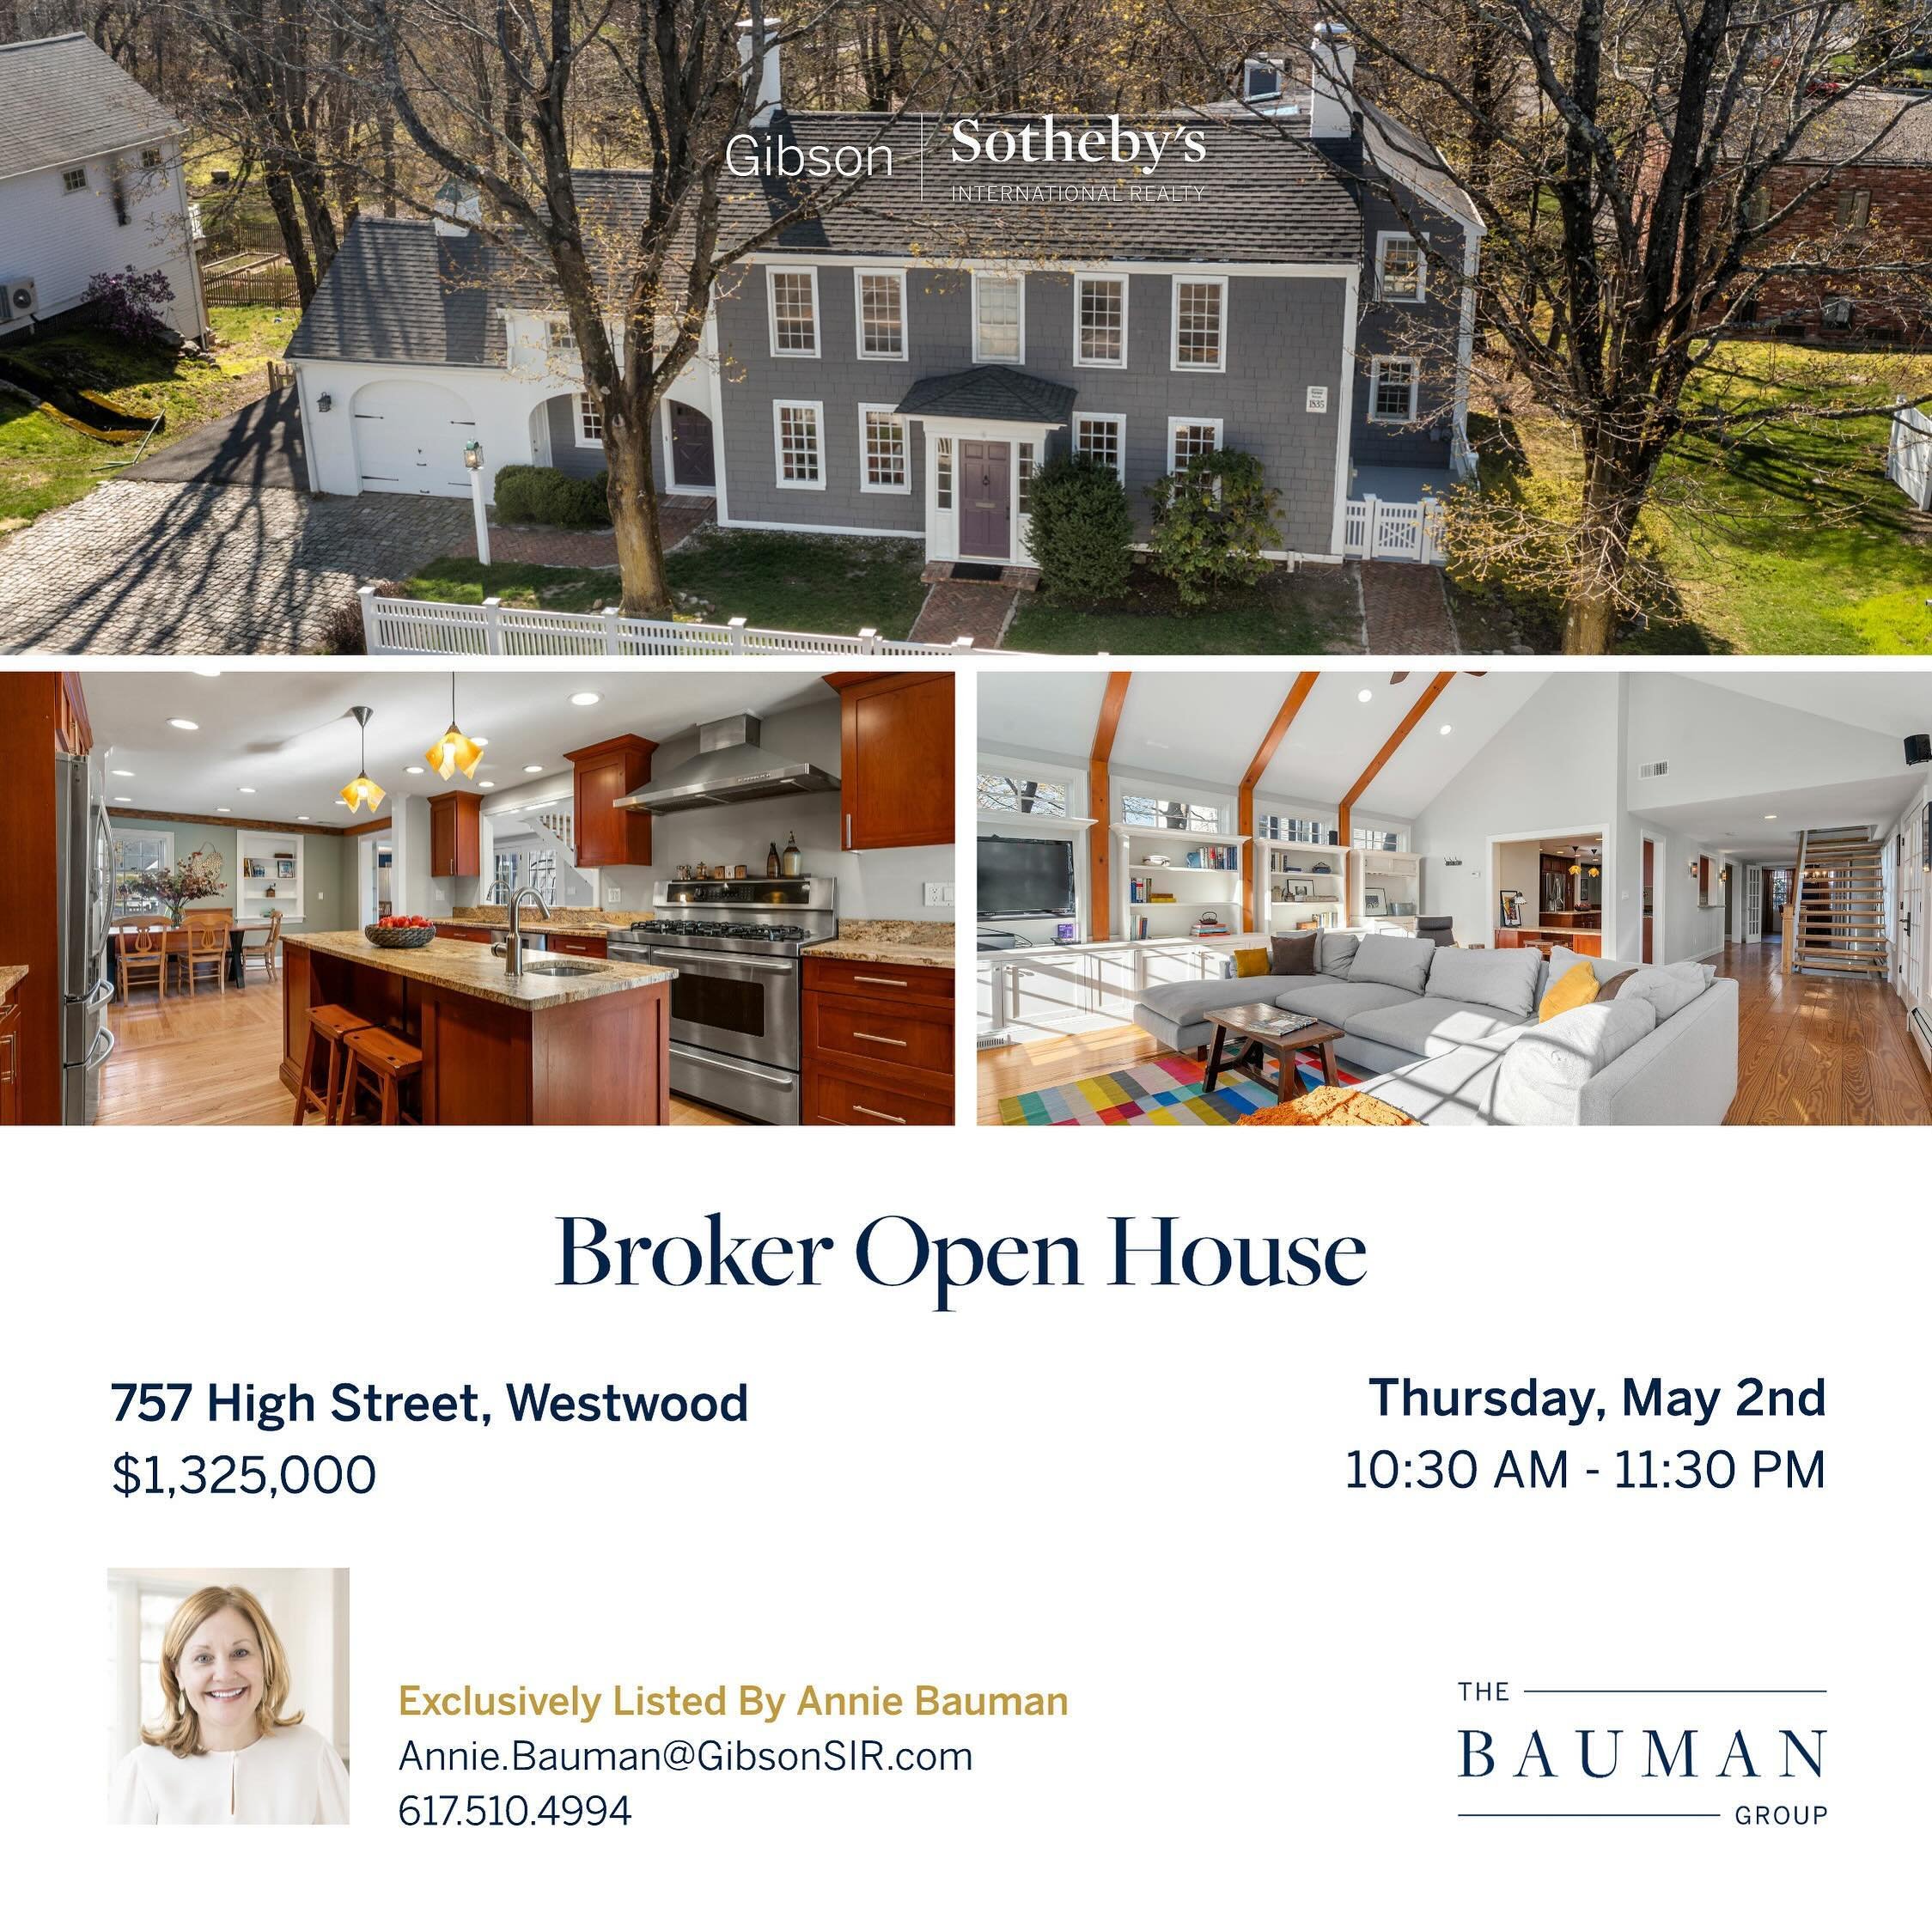 Join us! BROKER OPEN @ this downtown renovated antique. Close to coffee, school, rt 95, this much admired renovated antique will WOW buyers looking for something special. Come and see. #thebaumangroup #gibsonsothebysinternationalrealty #westwoodma